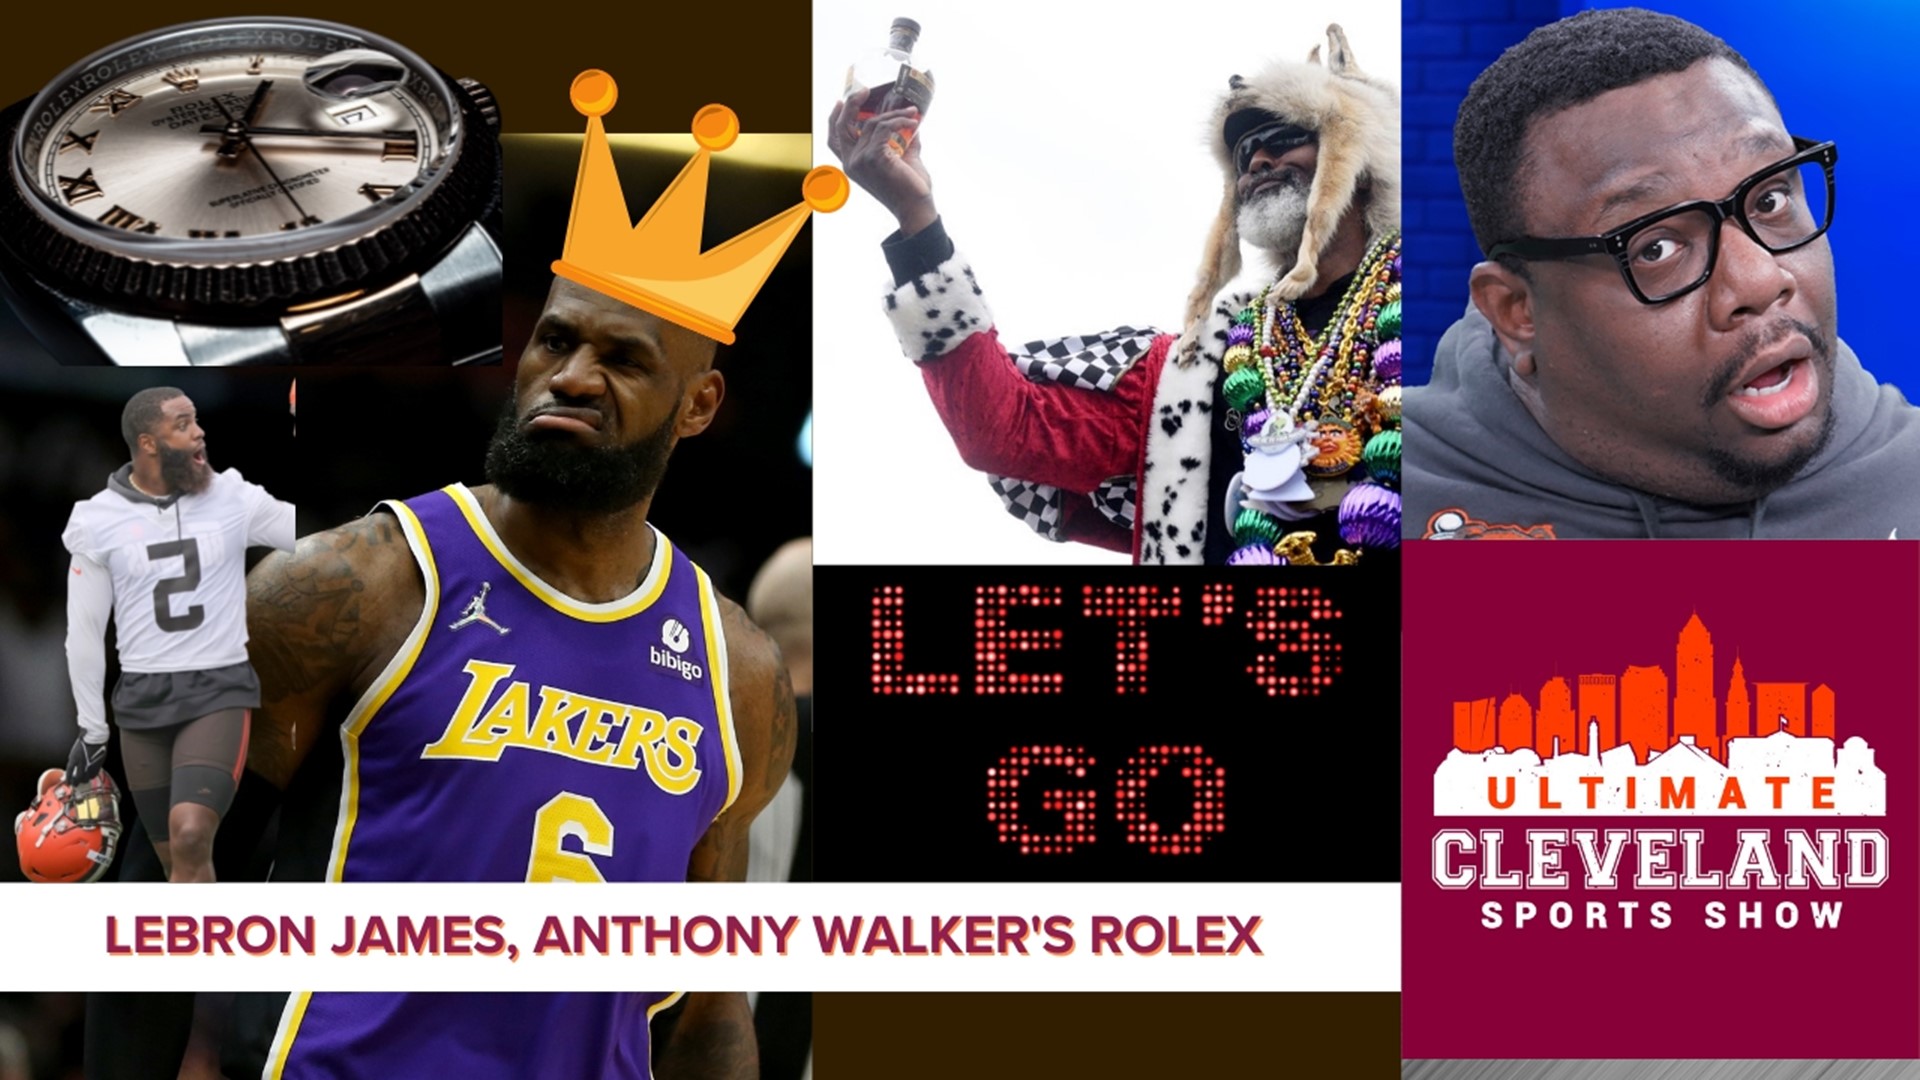 The UCSS crew discusses LeBron James making the ALL-NBA team for the 18th time and how healthy he is at his age in the league. They also debate if he will stay in LA